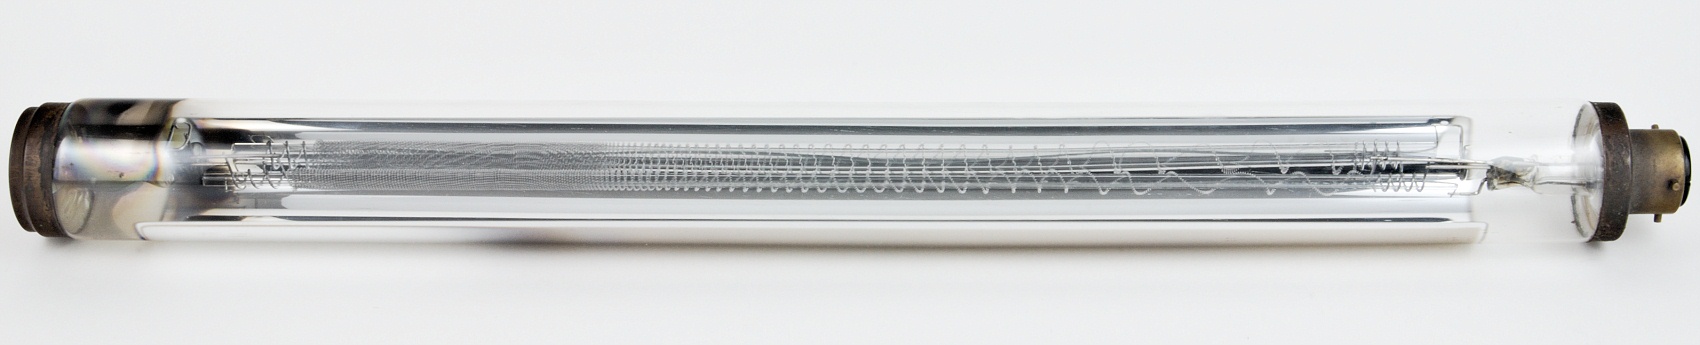 PHILIPS IRG 13235F/01 200-220V 300W Infrared Linear Reflector Heater Lamp